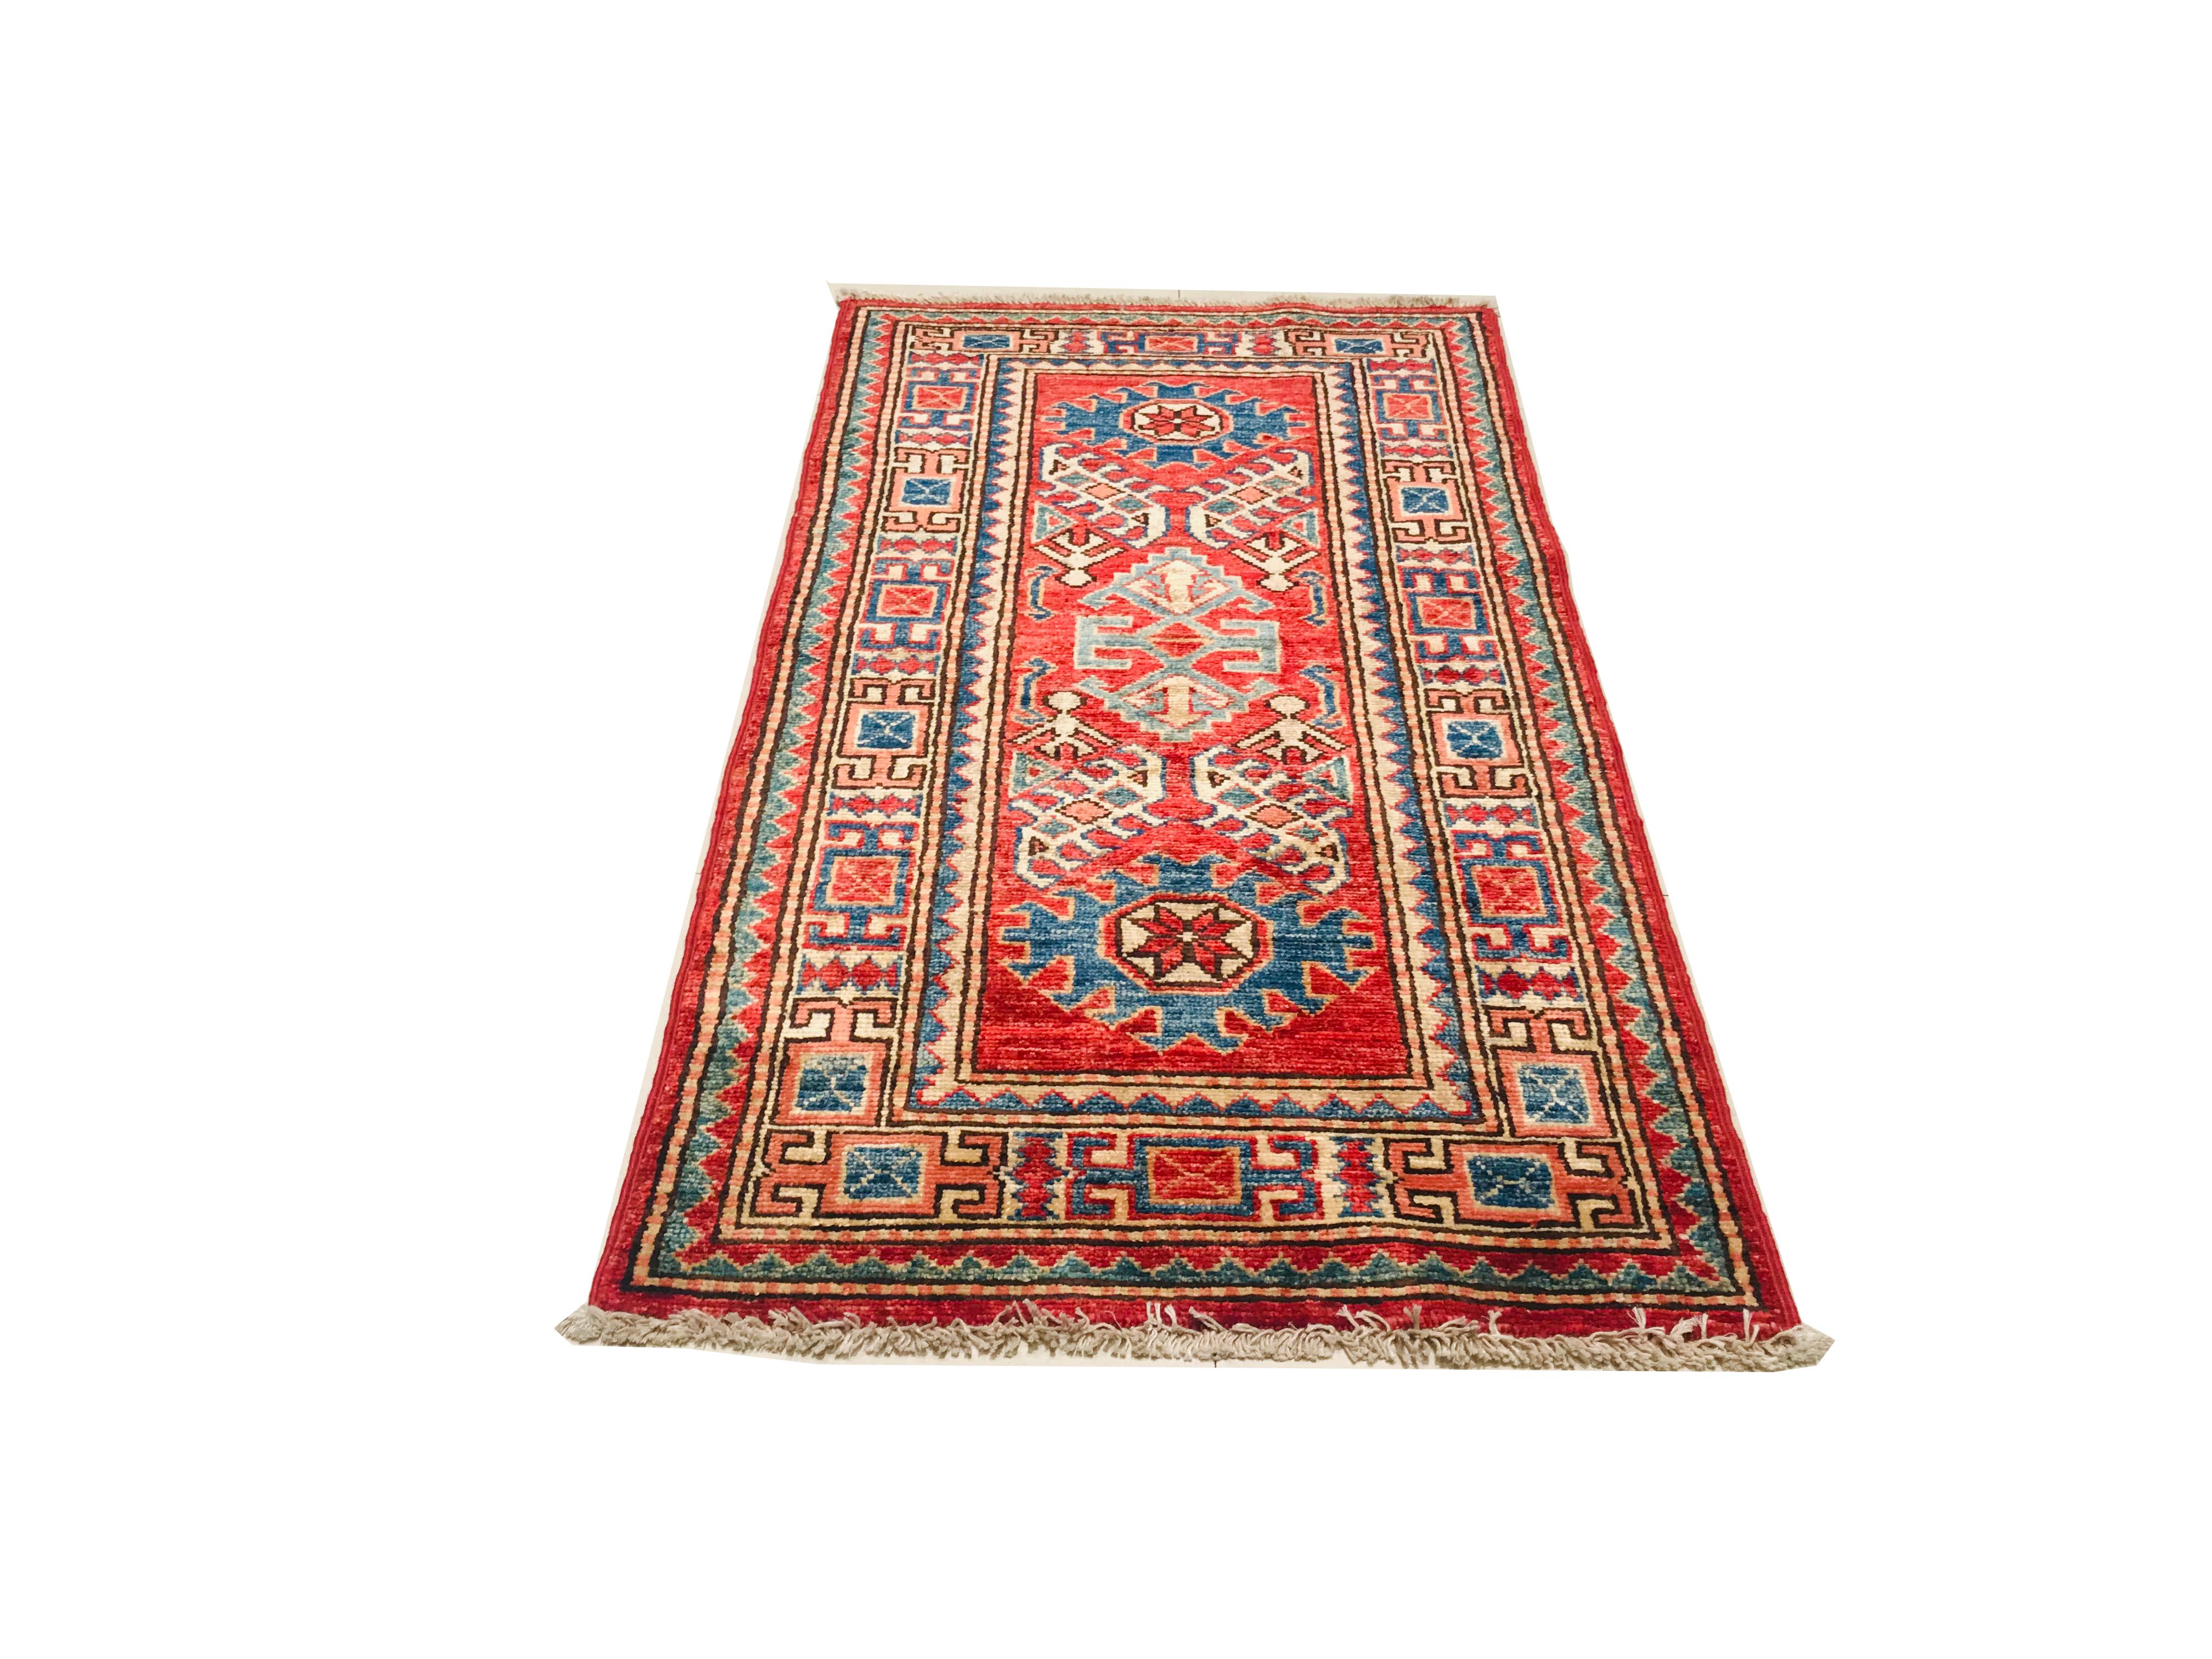 Afghan rug, from the 1970s, hand knotted with wool.
This set of carpet has geometric drawings, gives off a combination of soft colors such as red, beige, blue and green that makes it a perfect piece to decorate a corner of our home.